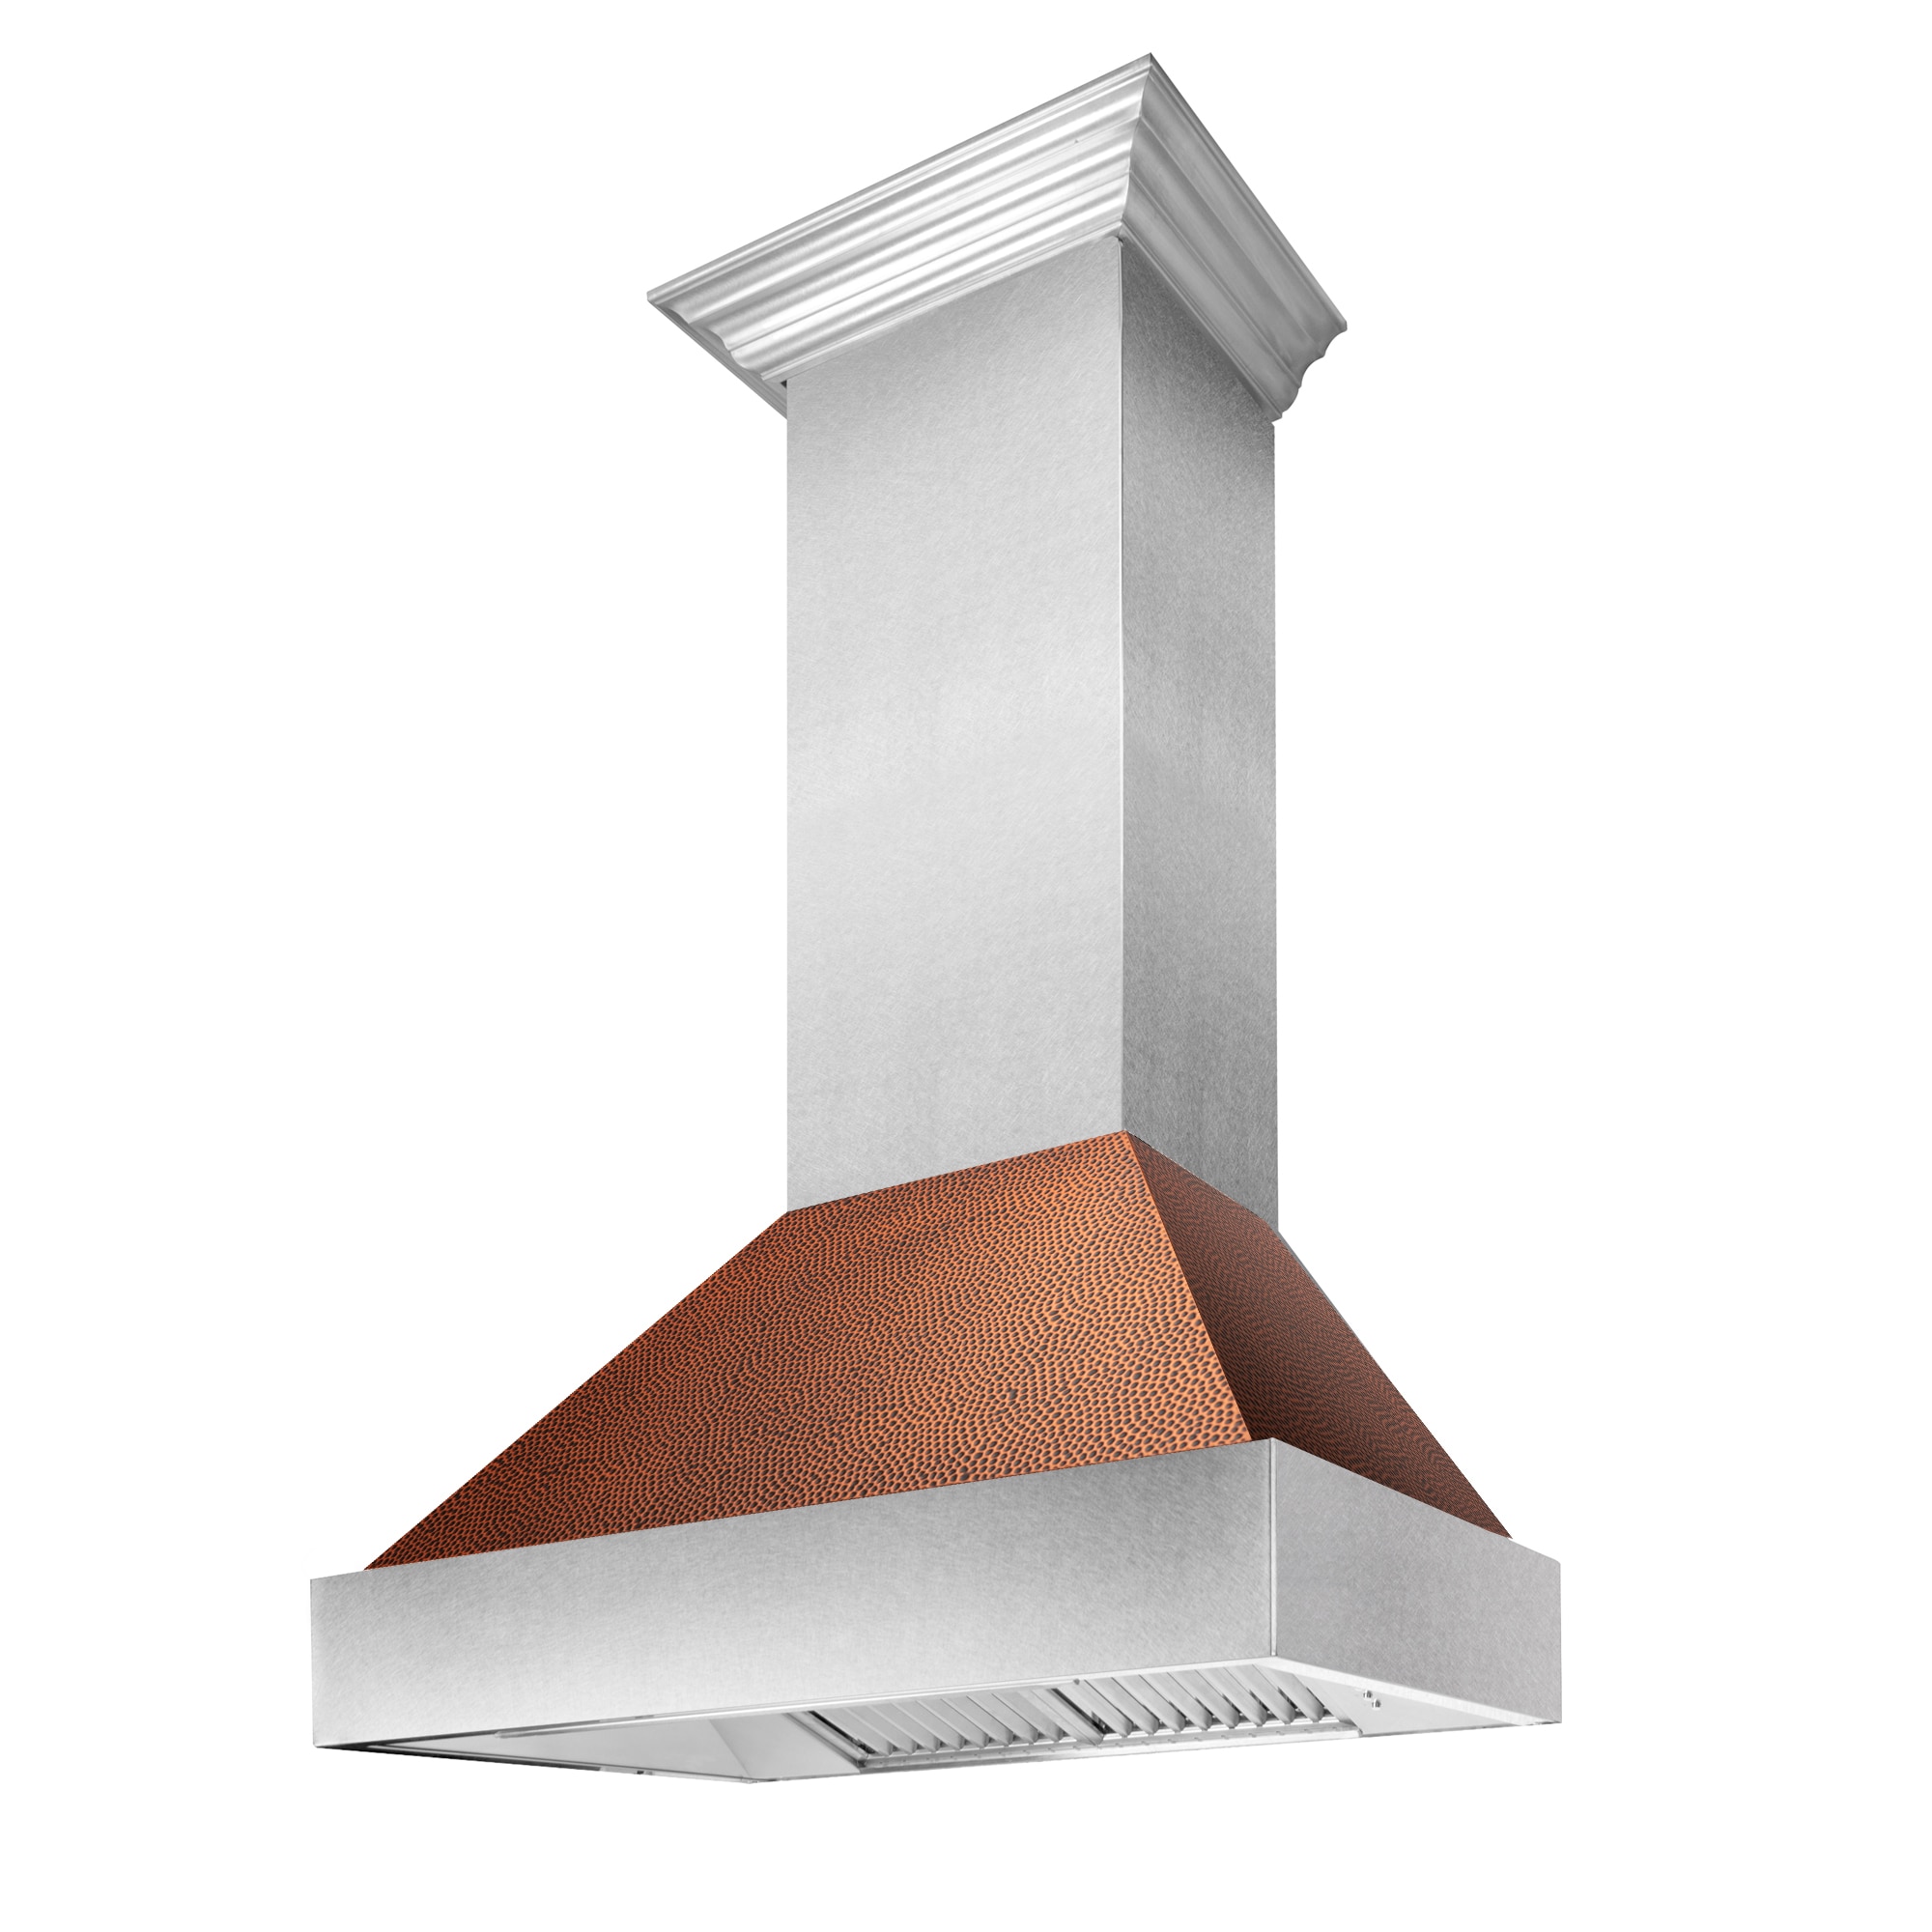 ZLINE BS65536BS Professional Wall Mount Range Hood with 4-Speed Fan, 700  CFM Blower, Push Button Control, LED Lighting, Dishwasher Safe, Delayed  Shutoff, and ETL Certified: 36 Inch - 700 CFM